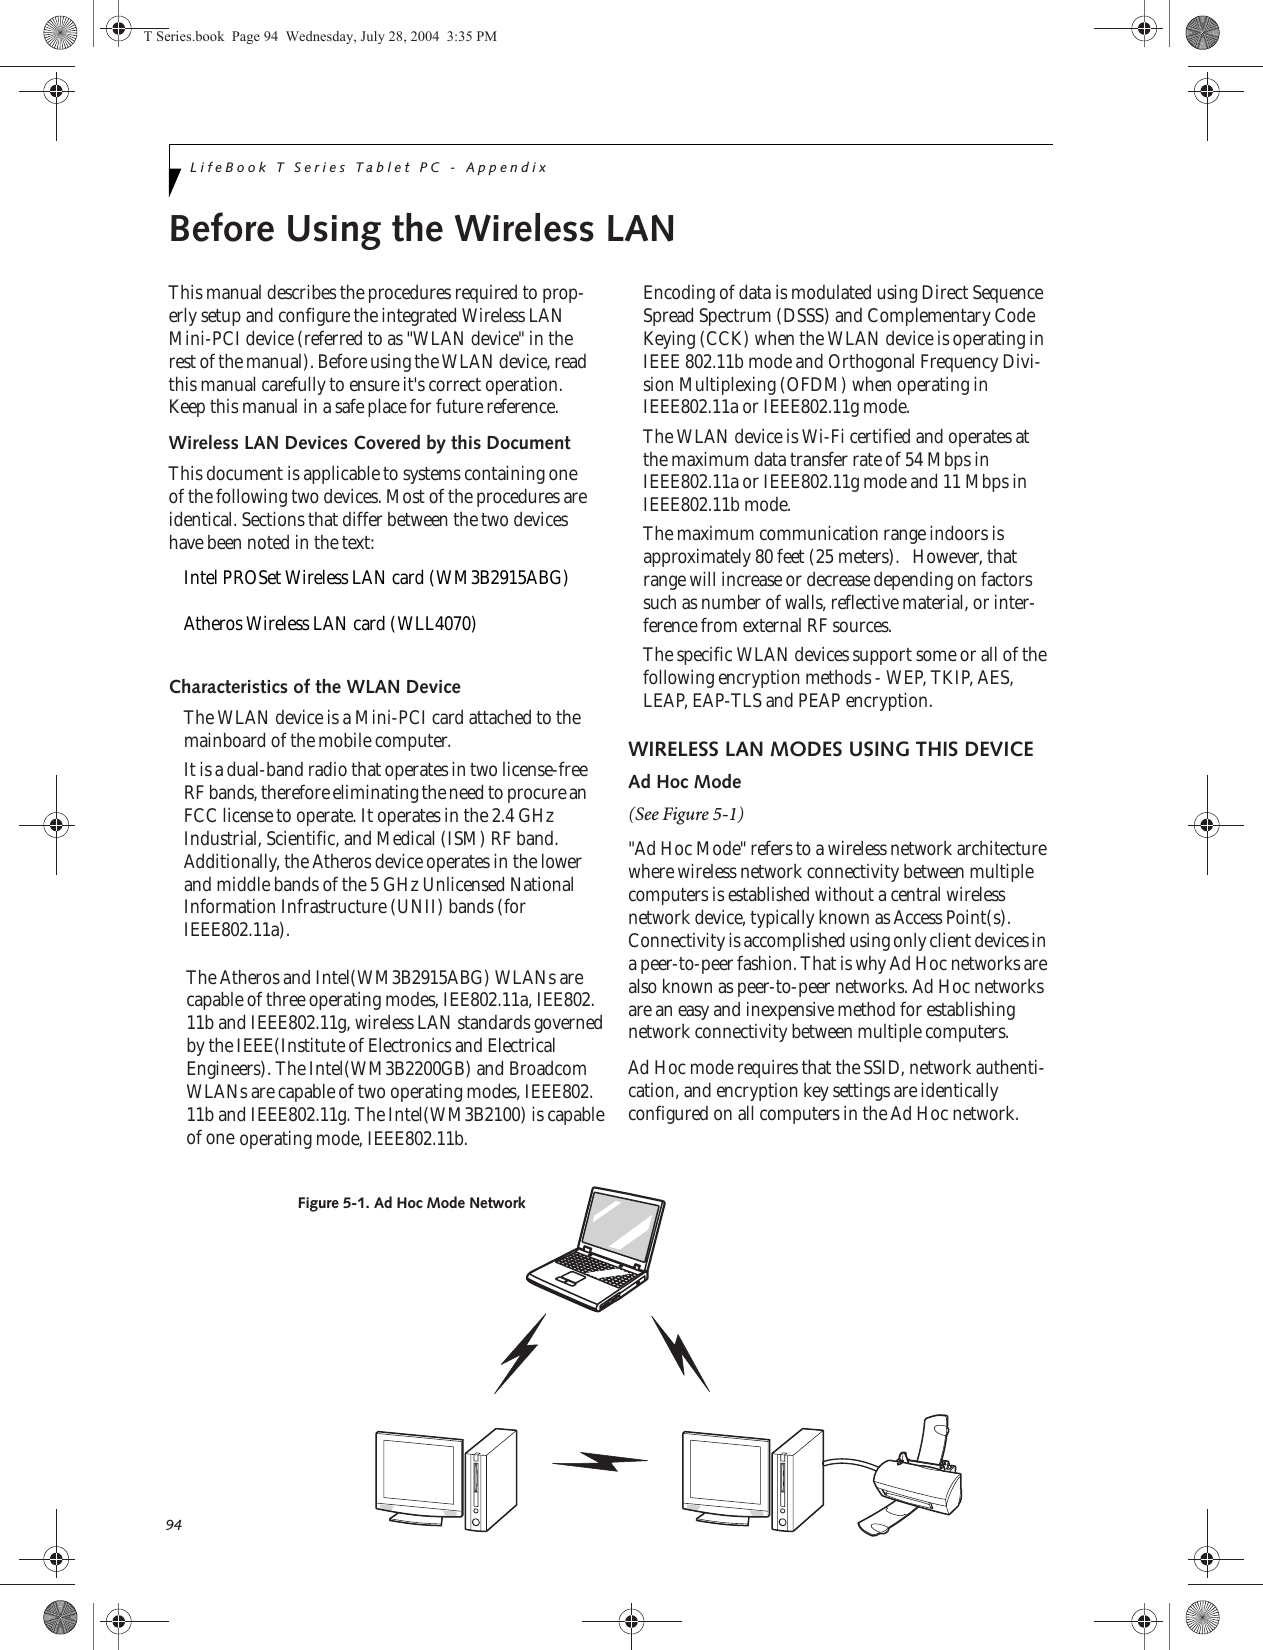 94LifeBook T Series Tablet PC - AppendixBefore Using the Wireless LANThis manual describes the procedures required to prop-erly setup and configure the integrated Wireless LAN Mini-PCI device (referred to as &quot;WLAN device&quot; in the rest of the manual). Before using the WLAN device, read this manual carefully to ensure it&apos;s correct operation. Keep this manual in a safe place for future reference.Wireless LAN Devices Covered by this DocumentThis document is applicable to systems containing one of the following two devices. Most of the procedures are identical. Sections that differ between the two devices have been noted in the text:Intel PROSet Wireless LAN card (WM3B2915ABG)Atheros Wireless LAN card (WLL4070)Characteristics of the WLAN DeviceThe WLAN device is a Mini-PCI card attached to the mainboard of the mobile computer. It is a dual-band radio that operates in two license-free RF bands, therefore eliminating the need to procure an FCC license to operate. It operates in the 2.4 GHz Industrial, Scientific, and Medical (ISM) RF band. Additionally, the Atheros device operates in the lower and middle bands of the 5 GHz Unlicensed National Information Infrastructure (UNII) bands (for IEEE802.11a).  operating mode, IEEE802.11b.Encoding of data is modulated using Direct Sequence Spread Spectrum (DSSS) and Complementary Code Keying (CCK) when the WLAN device is operating in IEEE 802.11b mode and Orthogonal Frequency Divi-sion Multiplexing (OFDM) when operating in IEEE802.11a or IEEE802.11g mode. The WLAN device is Wi-Fi certified and operates at the maximum data transfer rate of 54 Mbps in IEEE802.11a or IEEE802.11g mode and 11 Mbps in IEEE802.11b mode.The maximum communication range indoors is approximately 80 feet (25 meters).   However, that range will increase or decrease depending on factors such as number of walls, reflective material, or inter-ference from external RF sources.The specific WLAN devices support some or all of the following encryption methods - WEP, TKIP, AES, LEAP, EAP-TLS and PEAP encryption.WIRELESS LAN MODES USING THIS DEVICEAd Hoc Mode (See Figure 5-1)&quot;Ad Hoc Mode&quot; refers to a wireless network architecture where wireless network connectivity between multiple computers is established without a central wireless network device, typically known as Access Point(s). Connectivity is accomplished using only client devices in a peer-to-peer fashion. That is why Ad Hoc networks are also known as peer-to-peer networks. Ad Hoc networks are an easy and inexpensive method for establishing network connectivity between multiple computers.Ad Hoc mode requires that the SSID, network authenti-cation, and encryption key settings are identically configured on all computers in the Ad Hoc network. Figure 5-1. Ad Hoc Mode NetworkT Series.book  Page 94  Wednesday, July 28, 2004  3:35 PMThe Atheros and Intel(WM3B2915ABG) WLANs arecapable of three operating modes, IEE802.11a, IEE802.11b and IEEE802.11g, wireless LAN standards governedby the IEEE(Institute of Electronics and Electrical Engineers). The Intel(WM3B2200GB) and Broadcom WLANs are capable of two operating modes, IEEE802.11b and IEEE802.11g. The Intel(WM3B2100) is capableof one